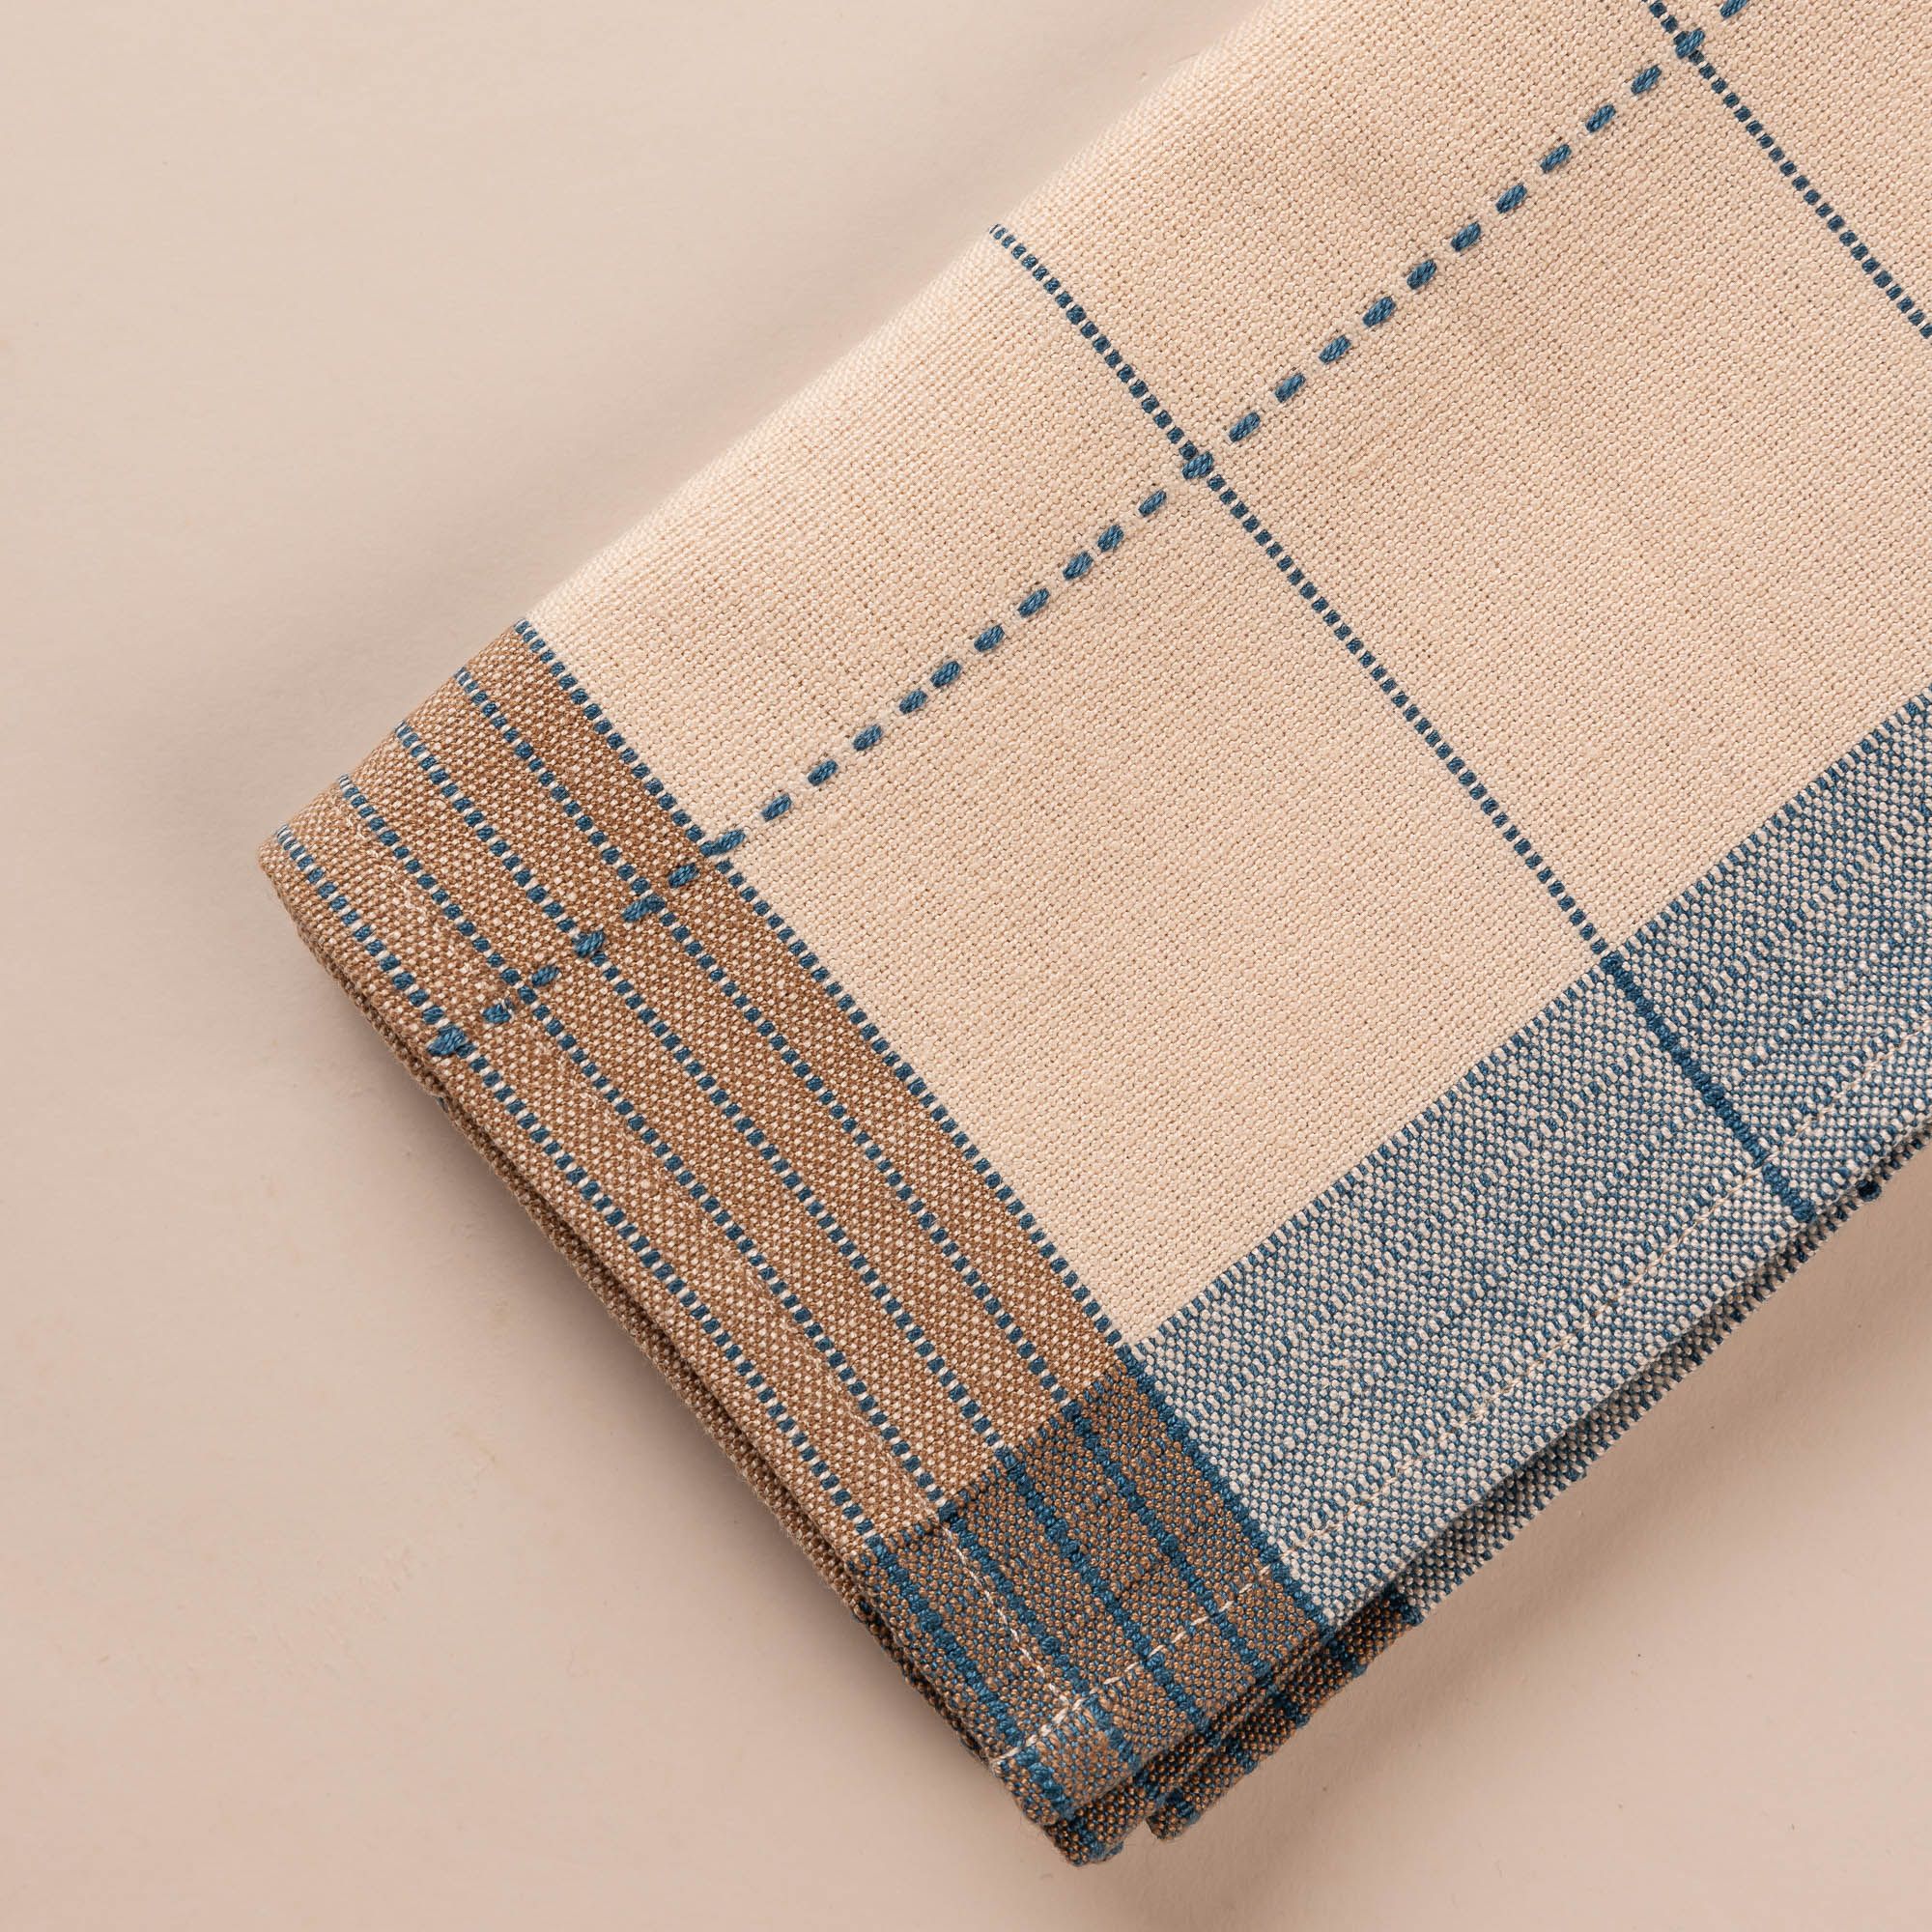 A closeup of a natural folded napkin designed with turquoise gridlines with light blue and tan striped edging.